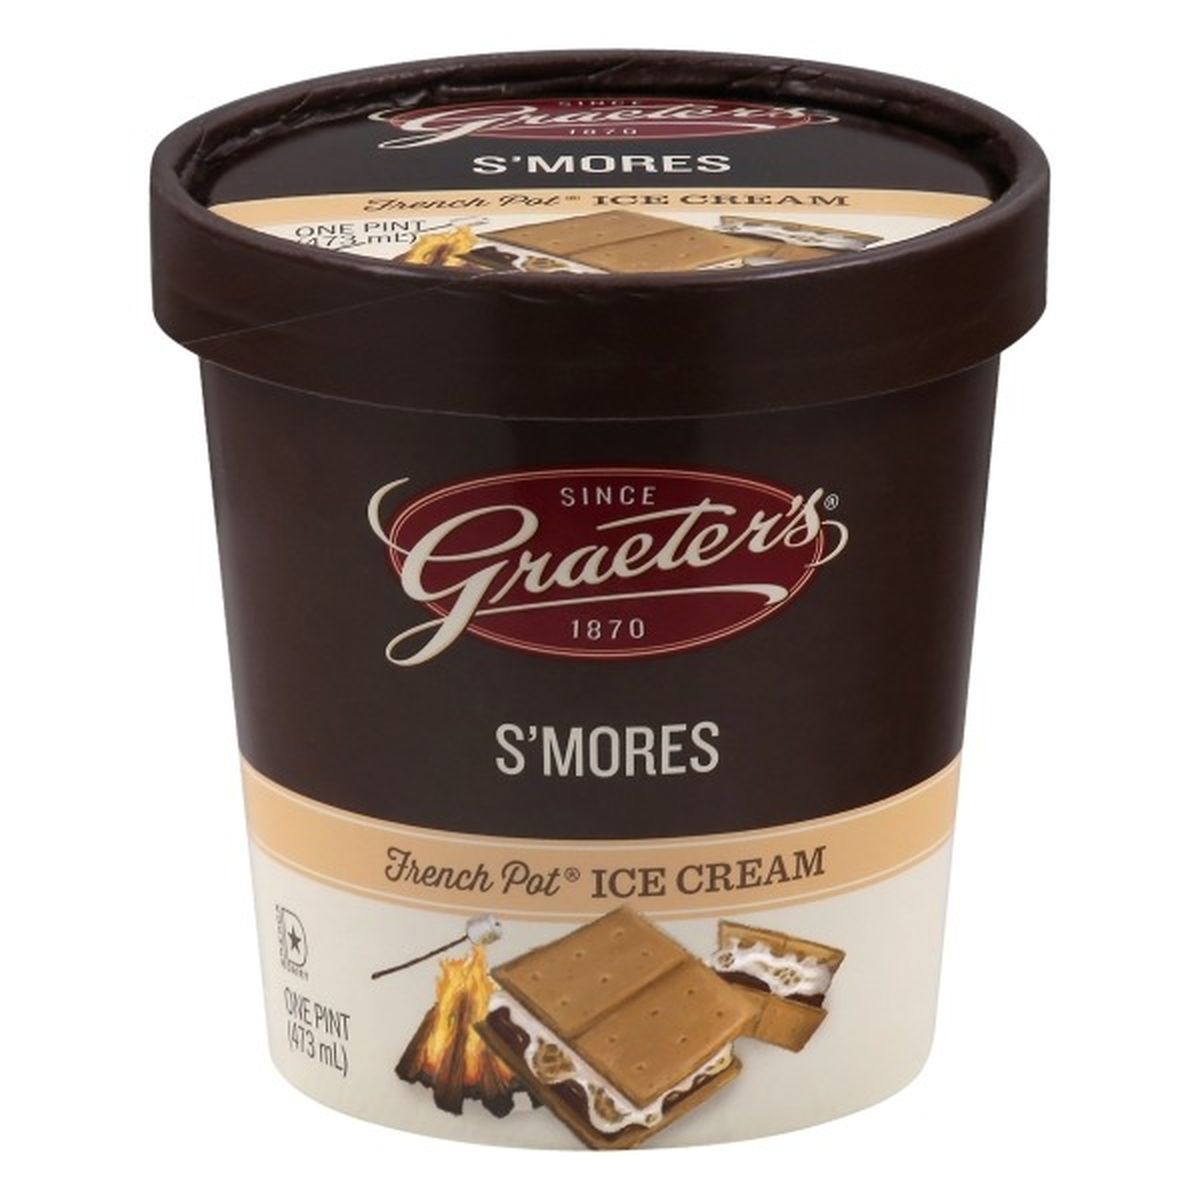 Calories in Graeter's Ice Cream, French Pot, S'mores